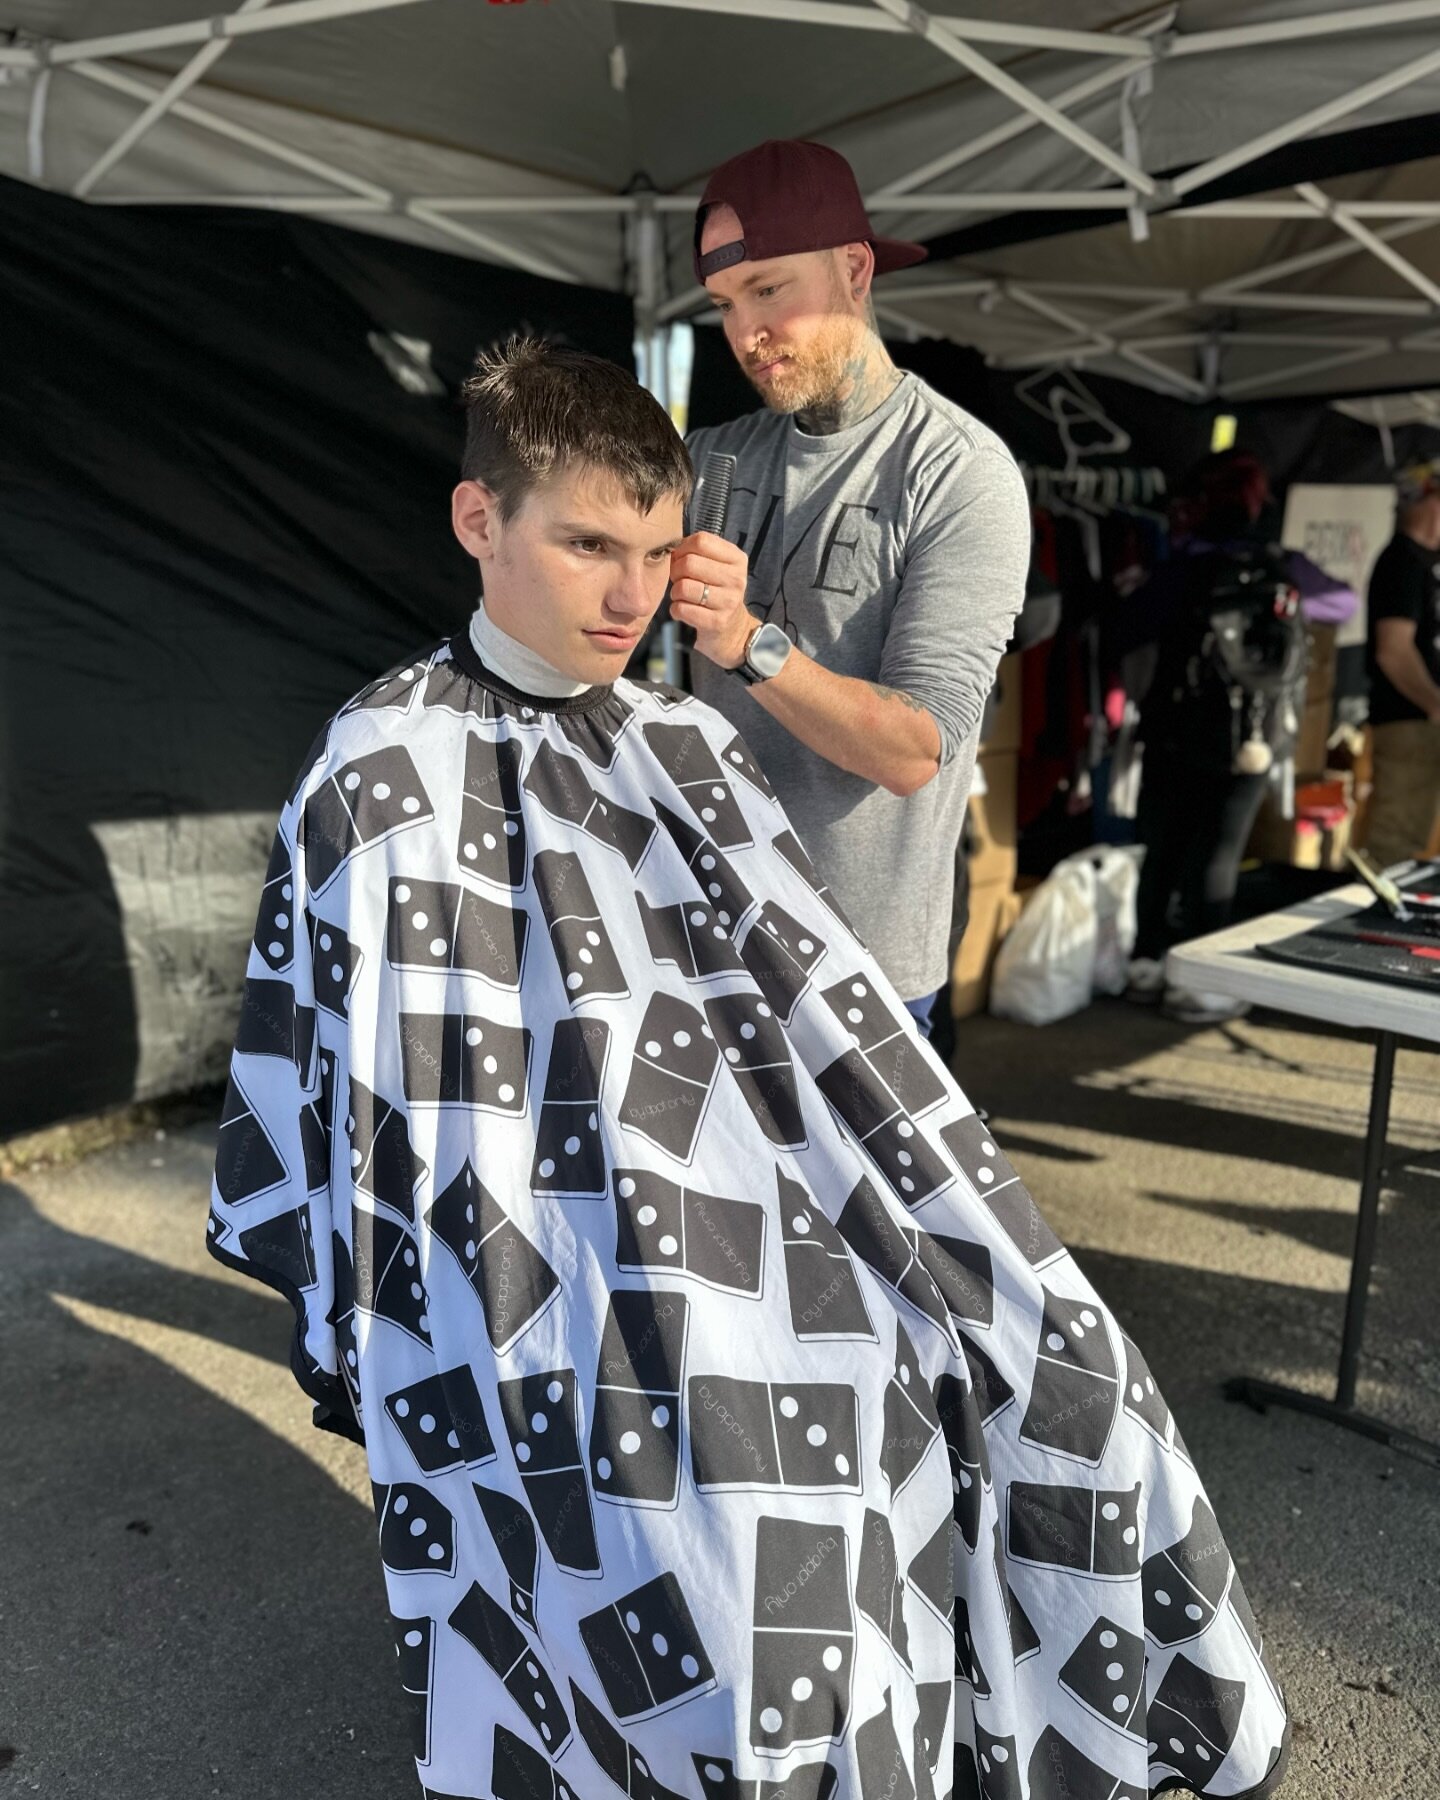 Last night, I had the pleasure of collaborating with PDX Saints Love for the first of many occasions, providing haircuts to the homeless. PDX Saints Love is a nonprofit with the mission to work to move love forward in the city of Portland. They are f